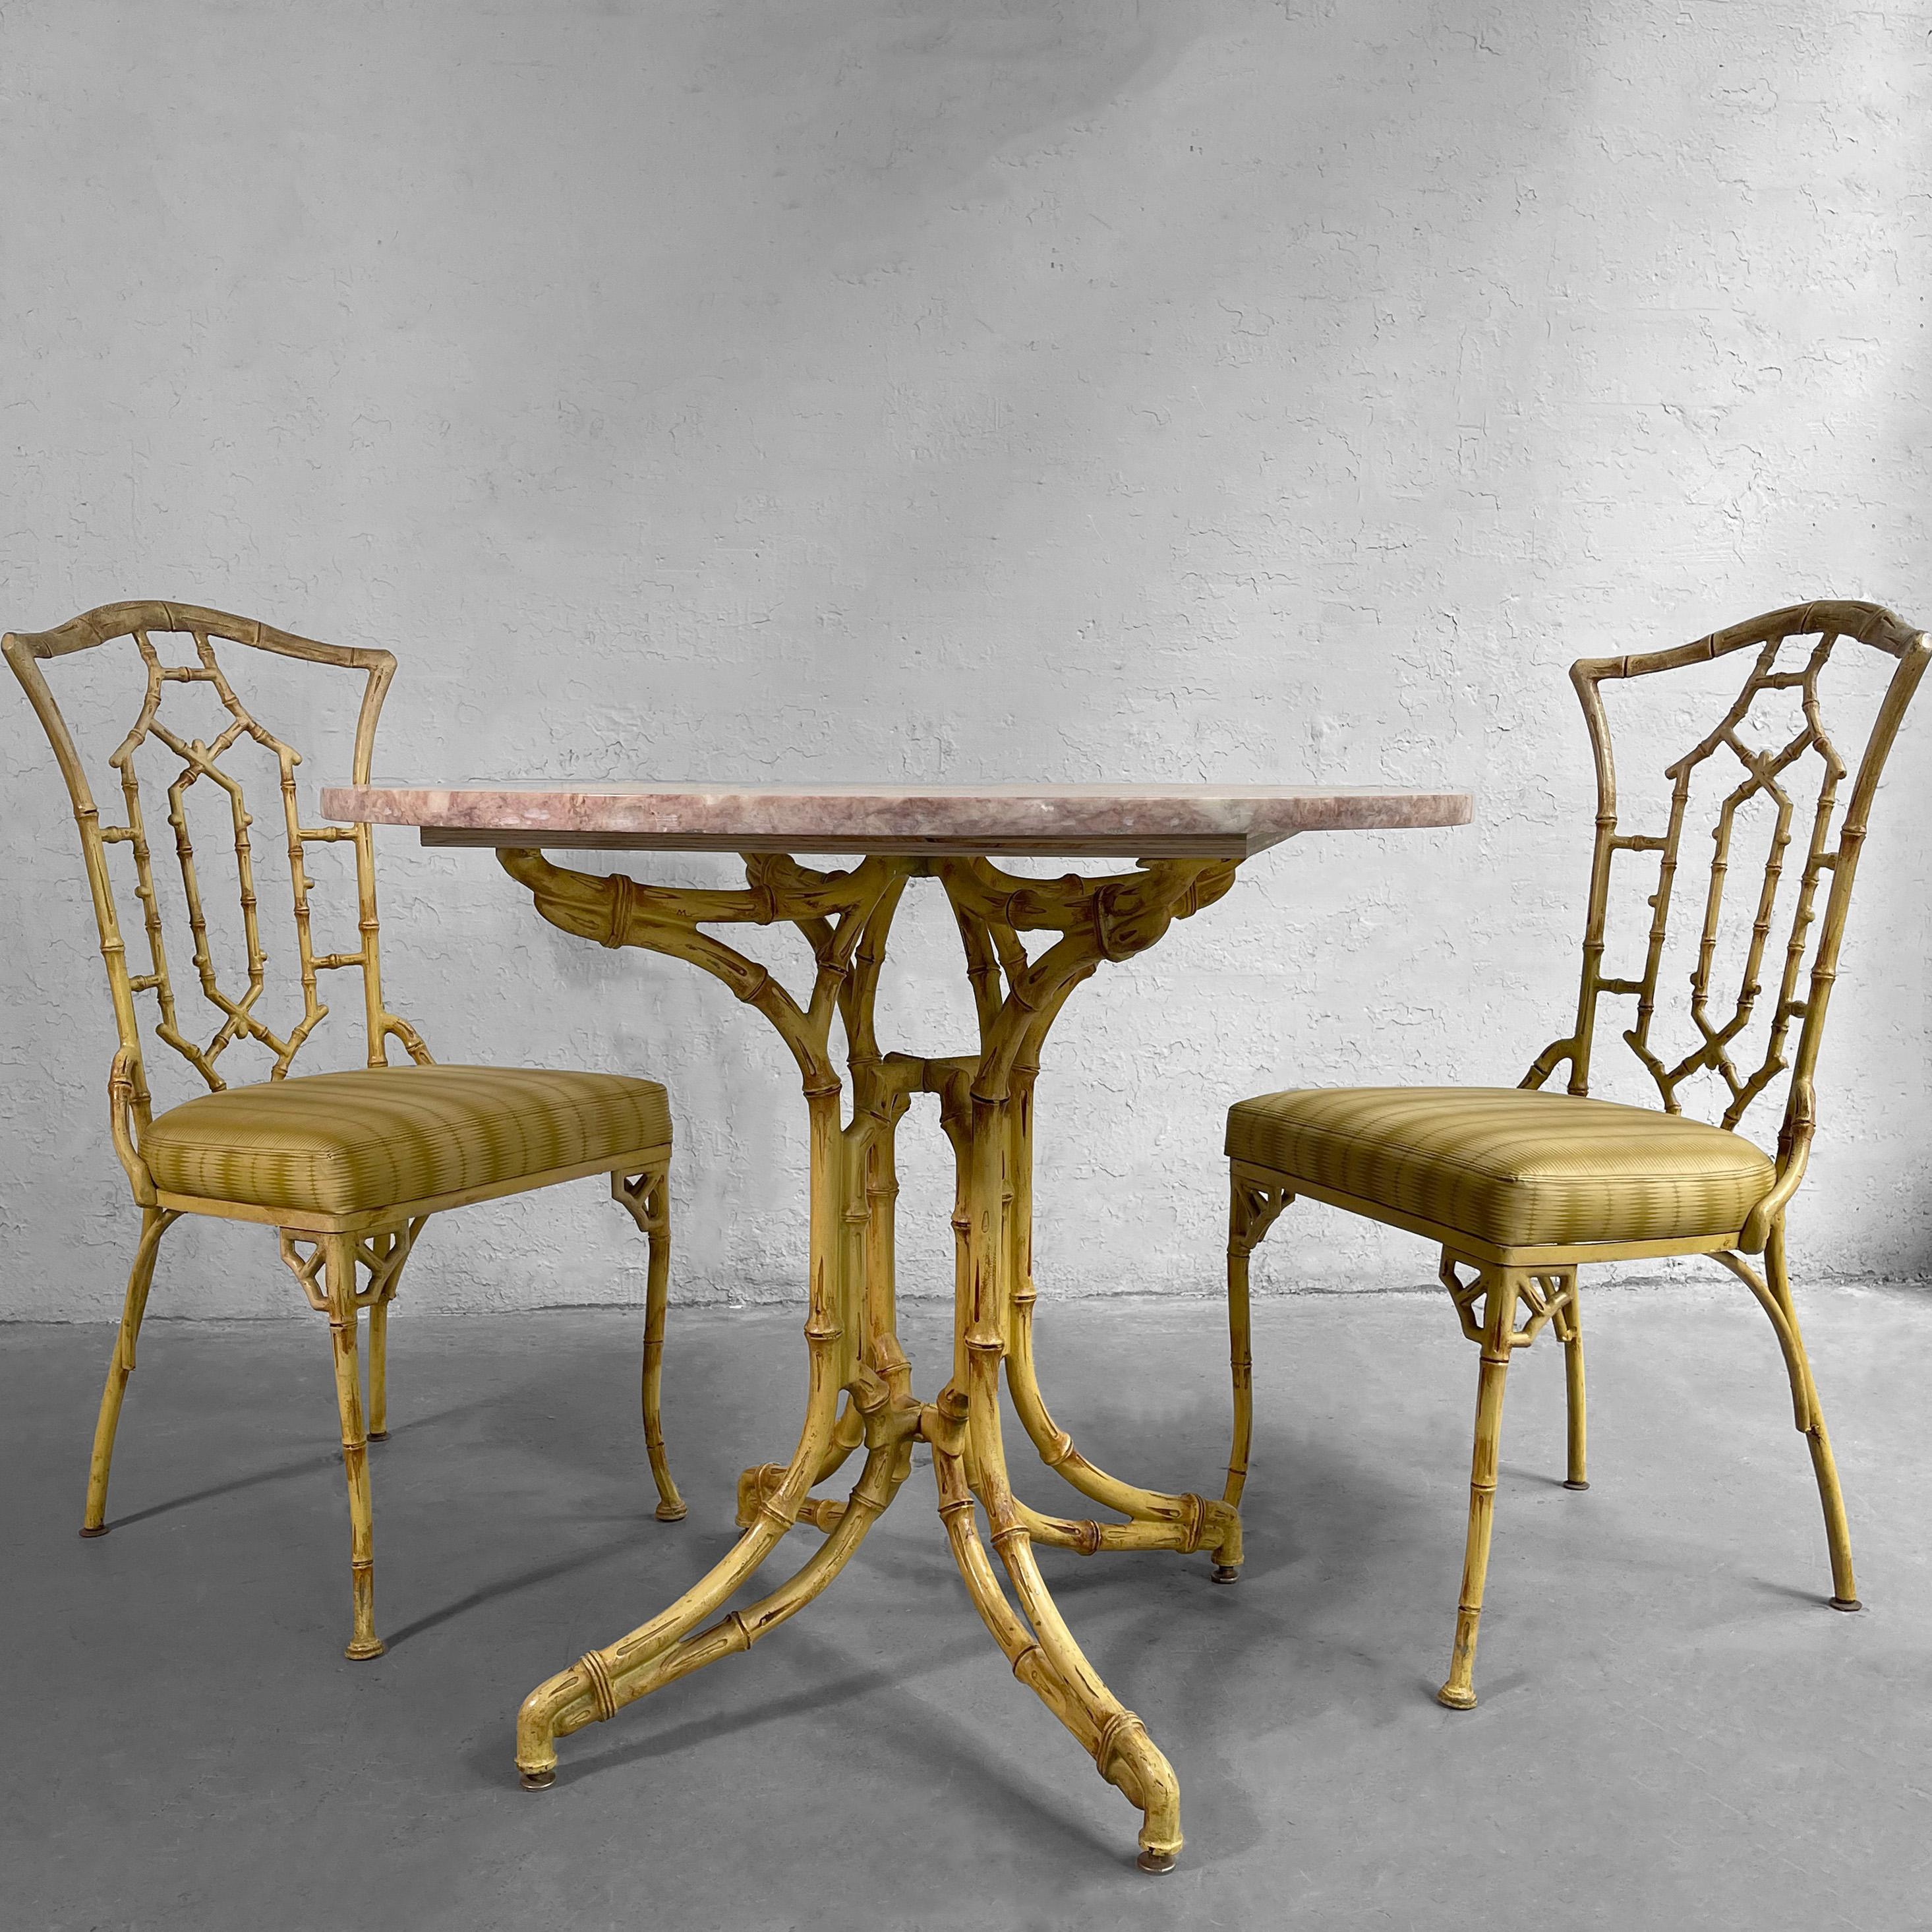 Midcentury, Hollywood Regency, faux bamboo, café dining set consists of two cast aluminum side chairs and a table base for indoor and outdoor use. The marble top shown is for reference and is not part of this set. The table base is 30 inches height